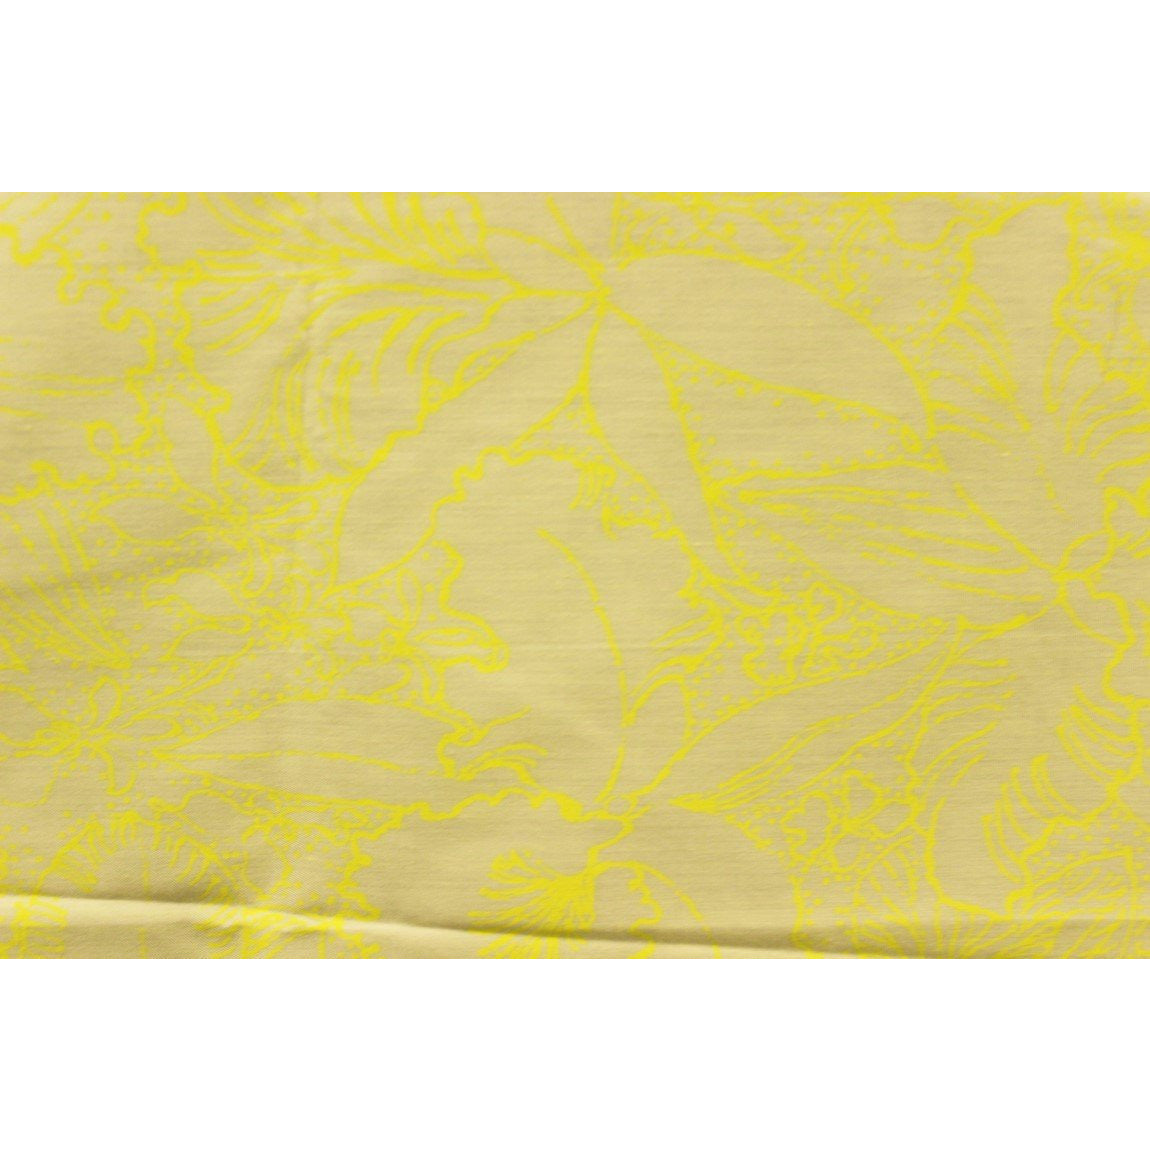 Lilly Pulitzer Vintage Yellow Floral Print Fabric